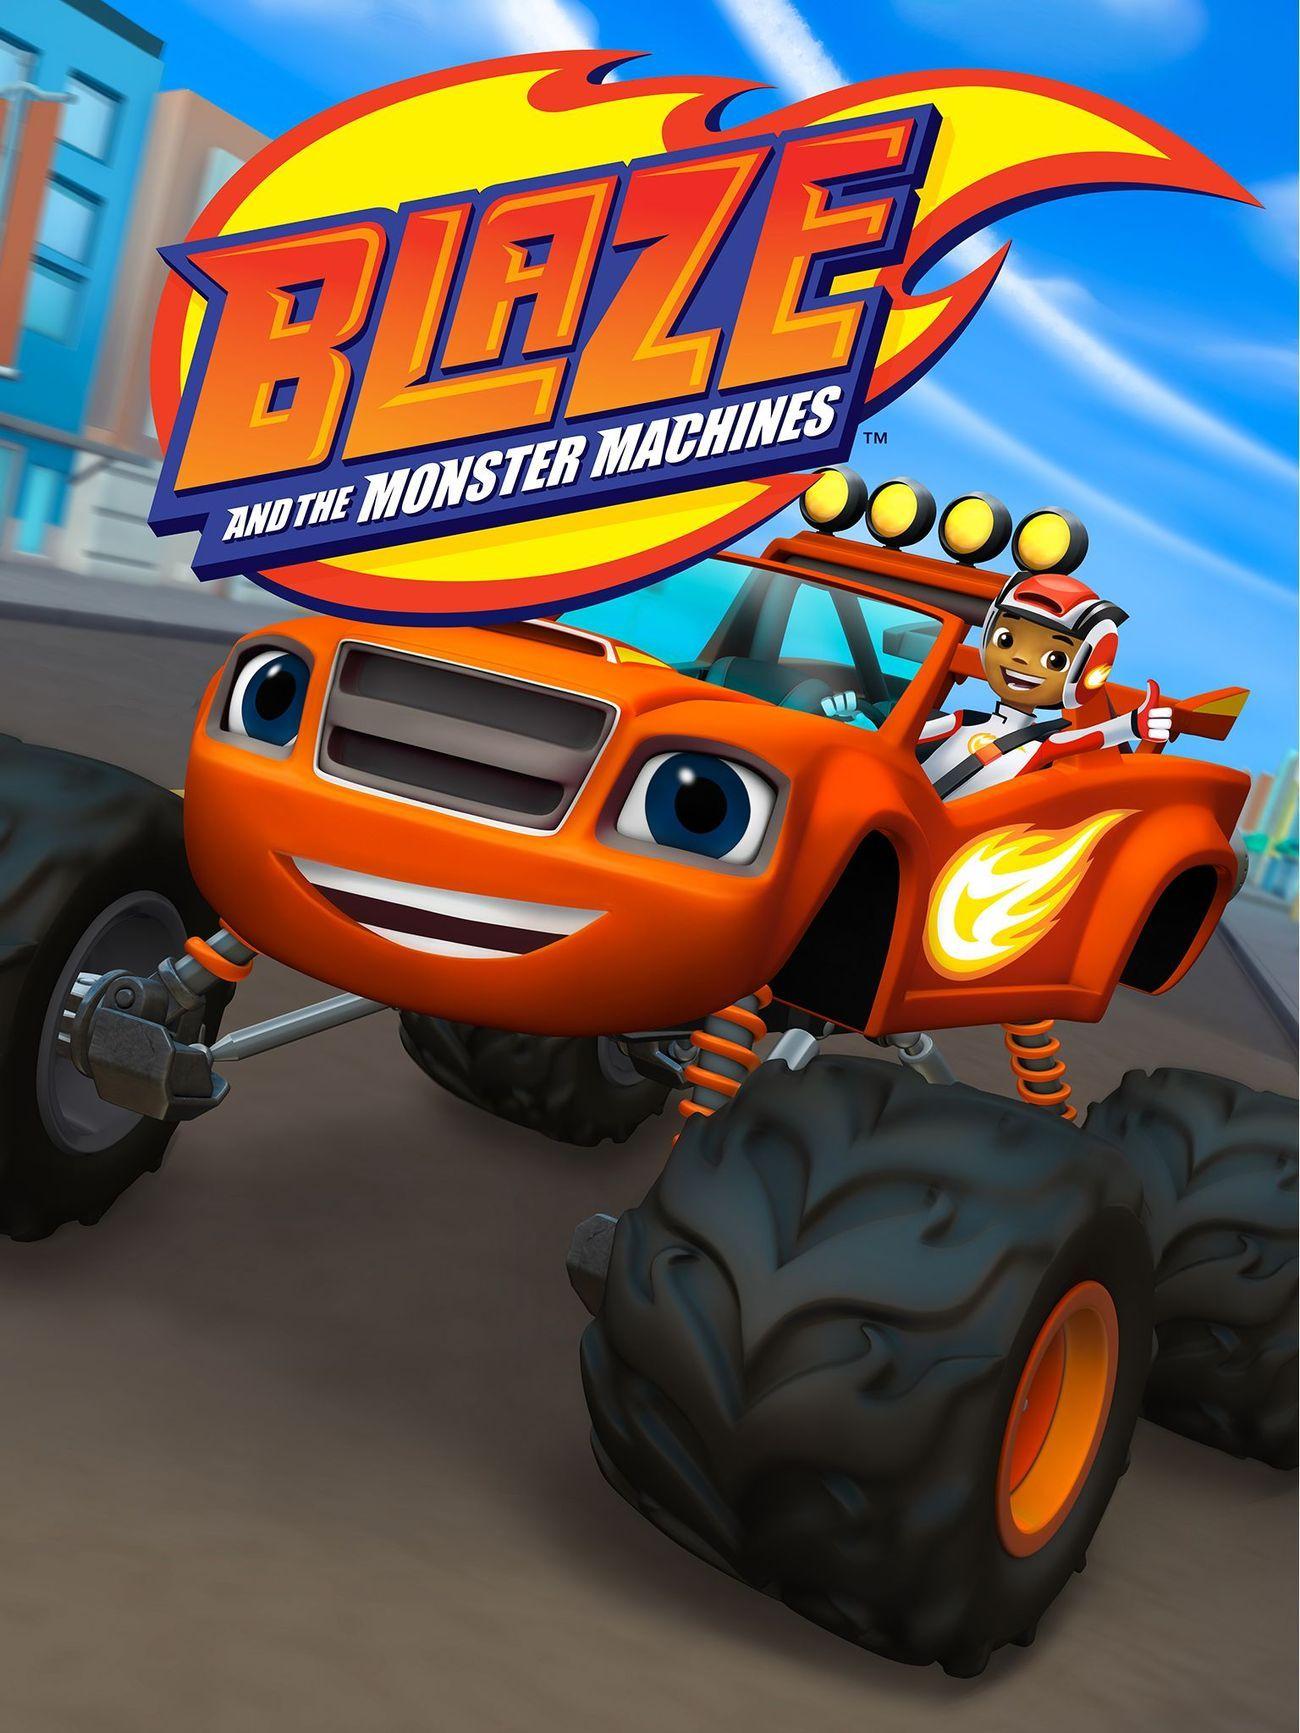 Blaze And The Monster Machines Wallpapers - Top Free Blaze And The ...